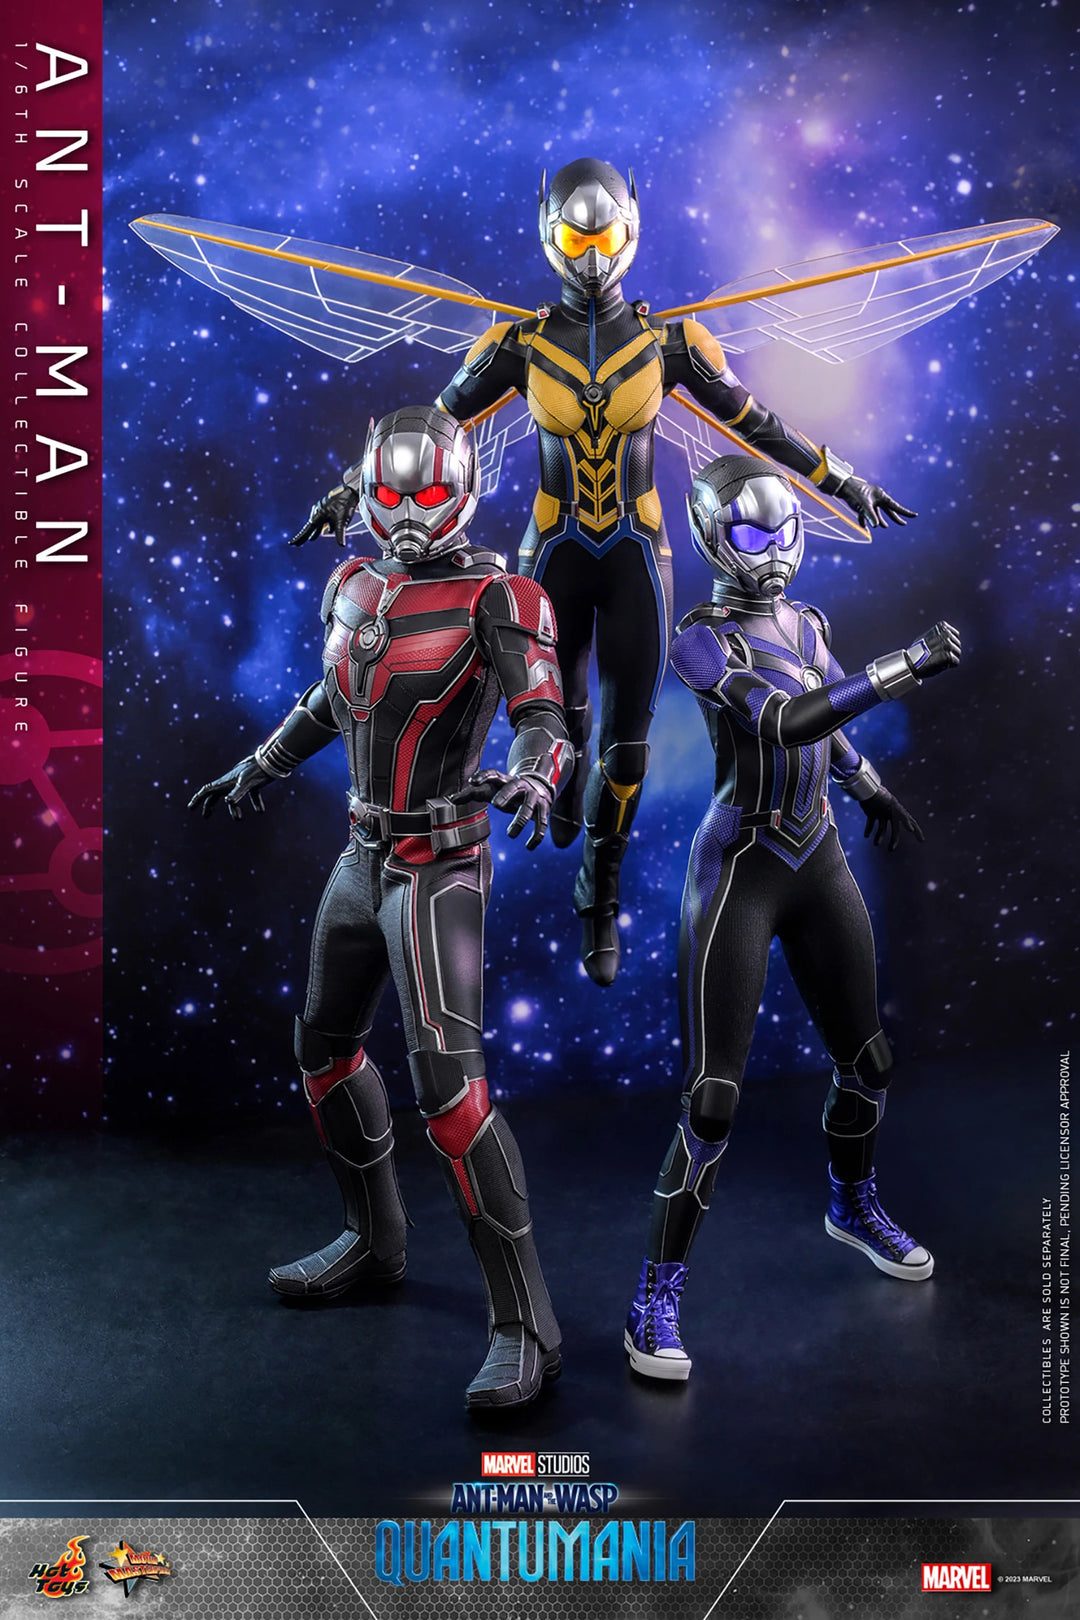 Hot Toys 1/6th Scale Figure Marvel Ant-Man and the Wasp Quantumania Ant-Man